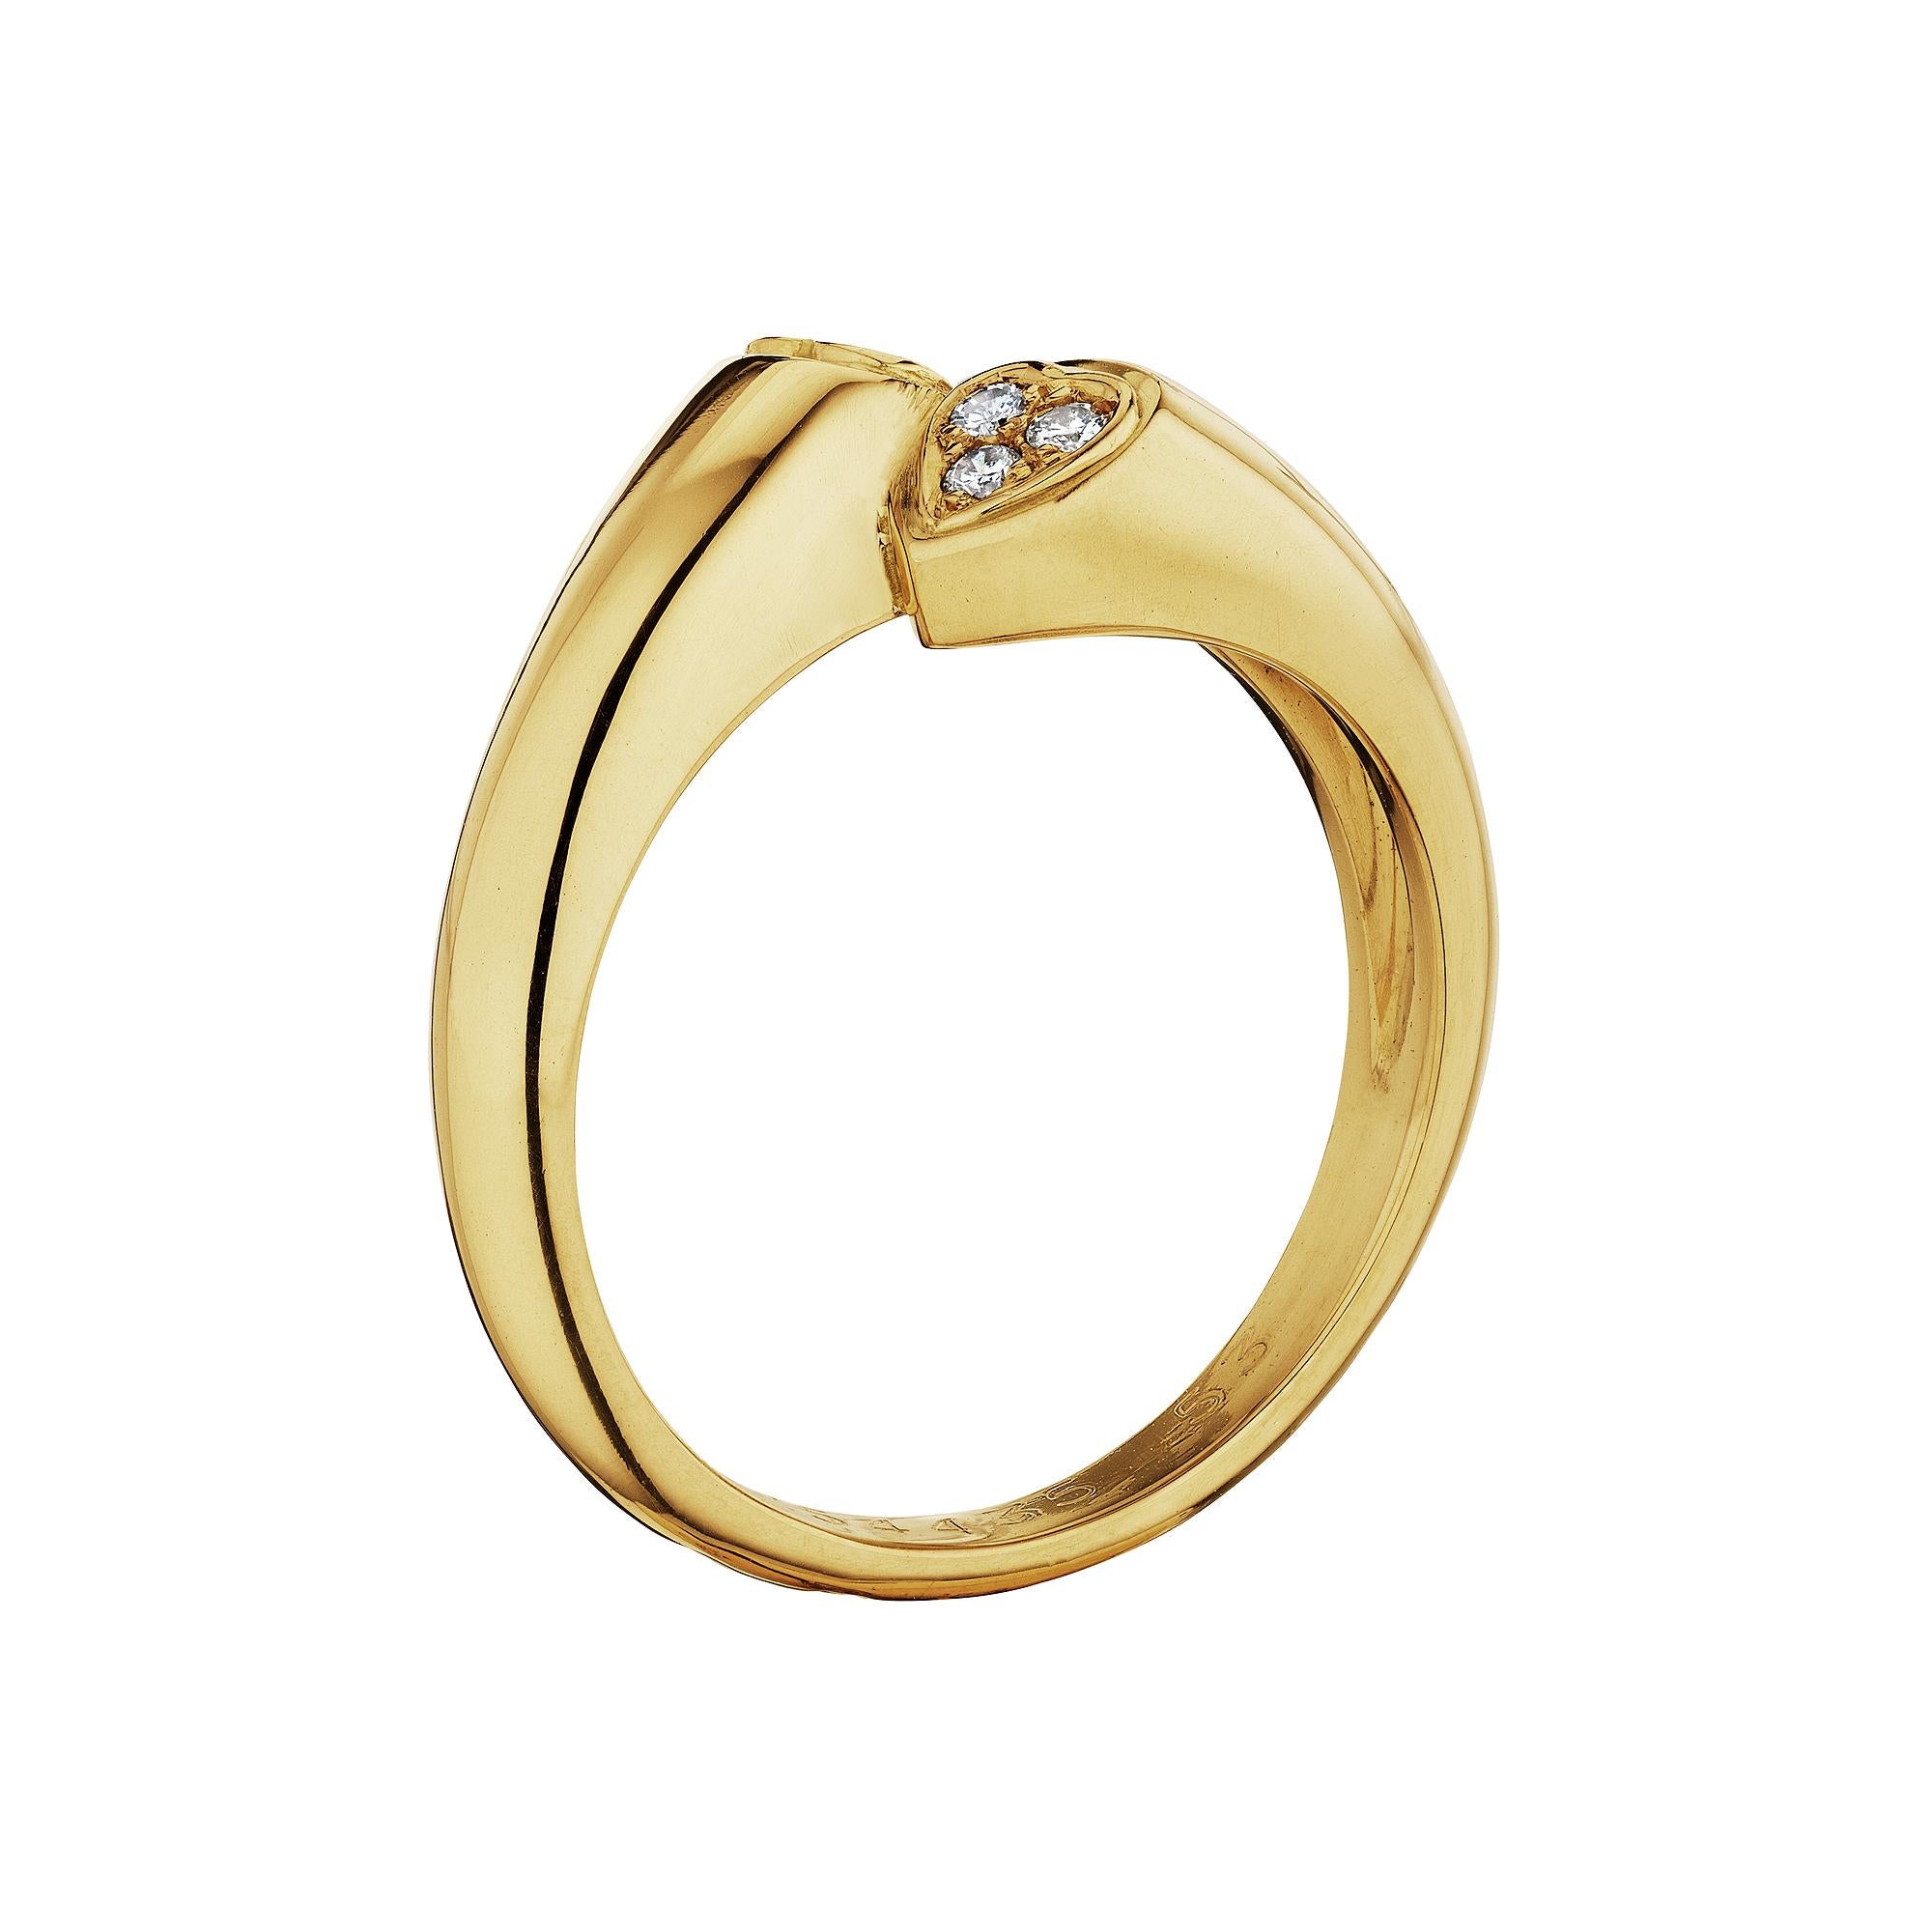 Two hearts are better than one, and this Cartier Paris modernist double heart diamond 18 karat yellow gold by-pass ring is overflowing with love.  With two diamond hearts joined in the center of the ring, this one-of-a-kind jewel is filled with